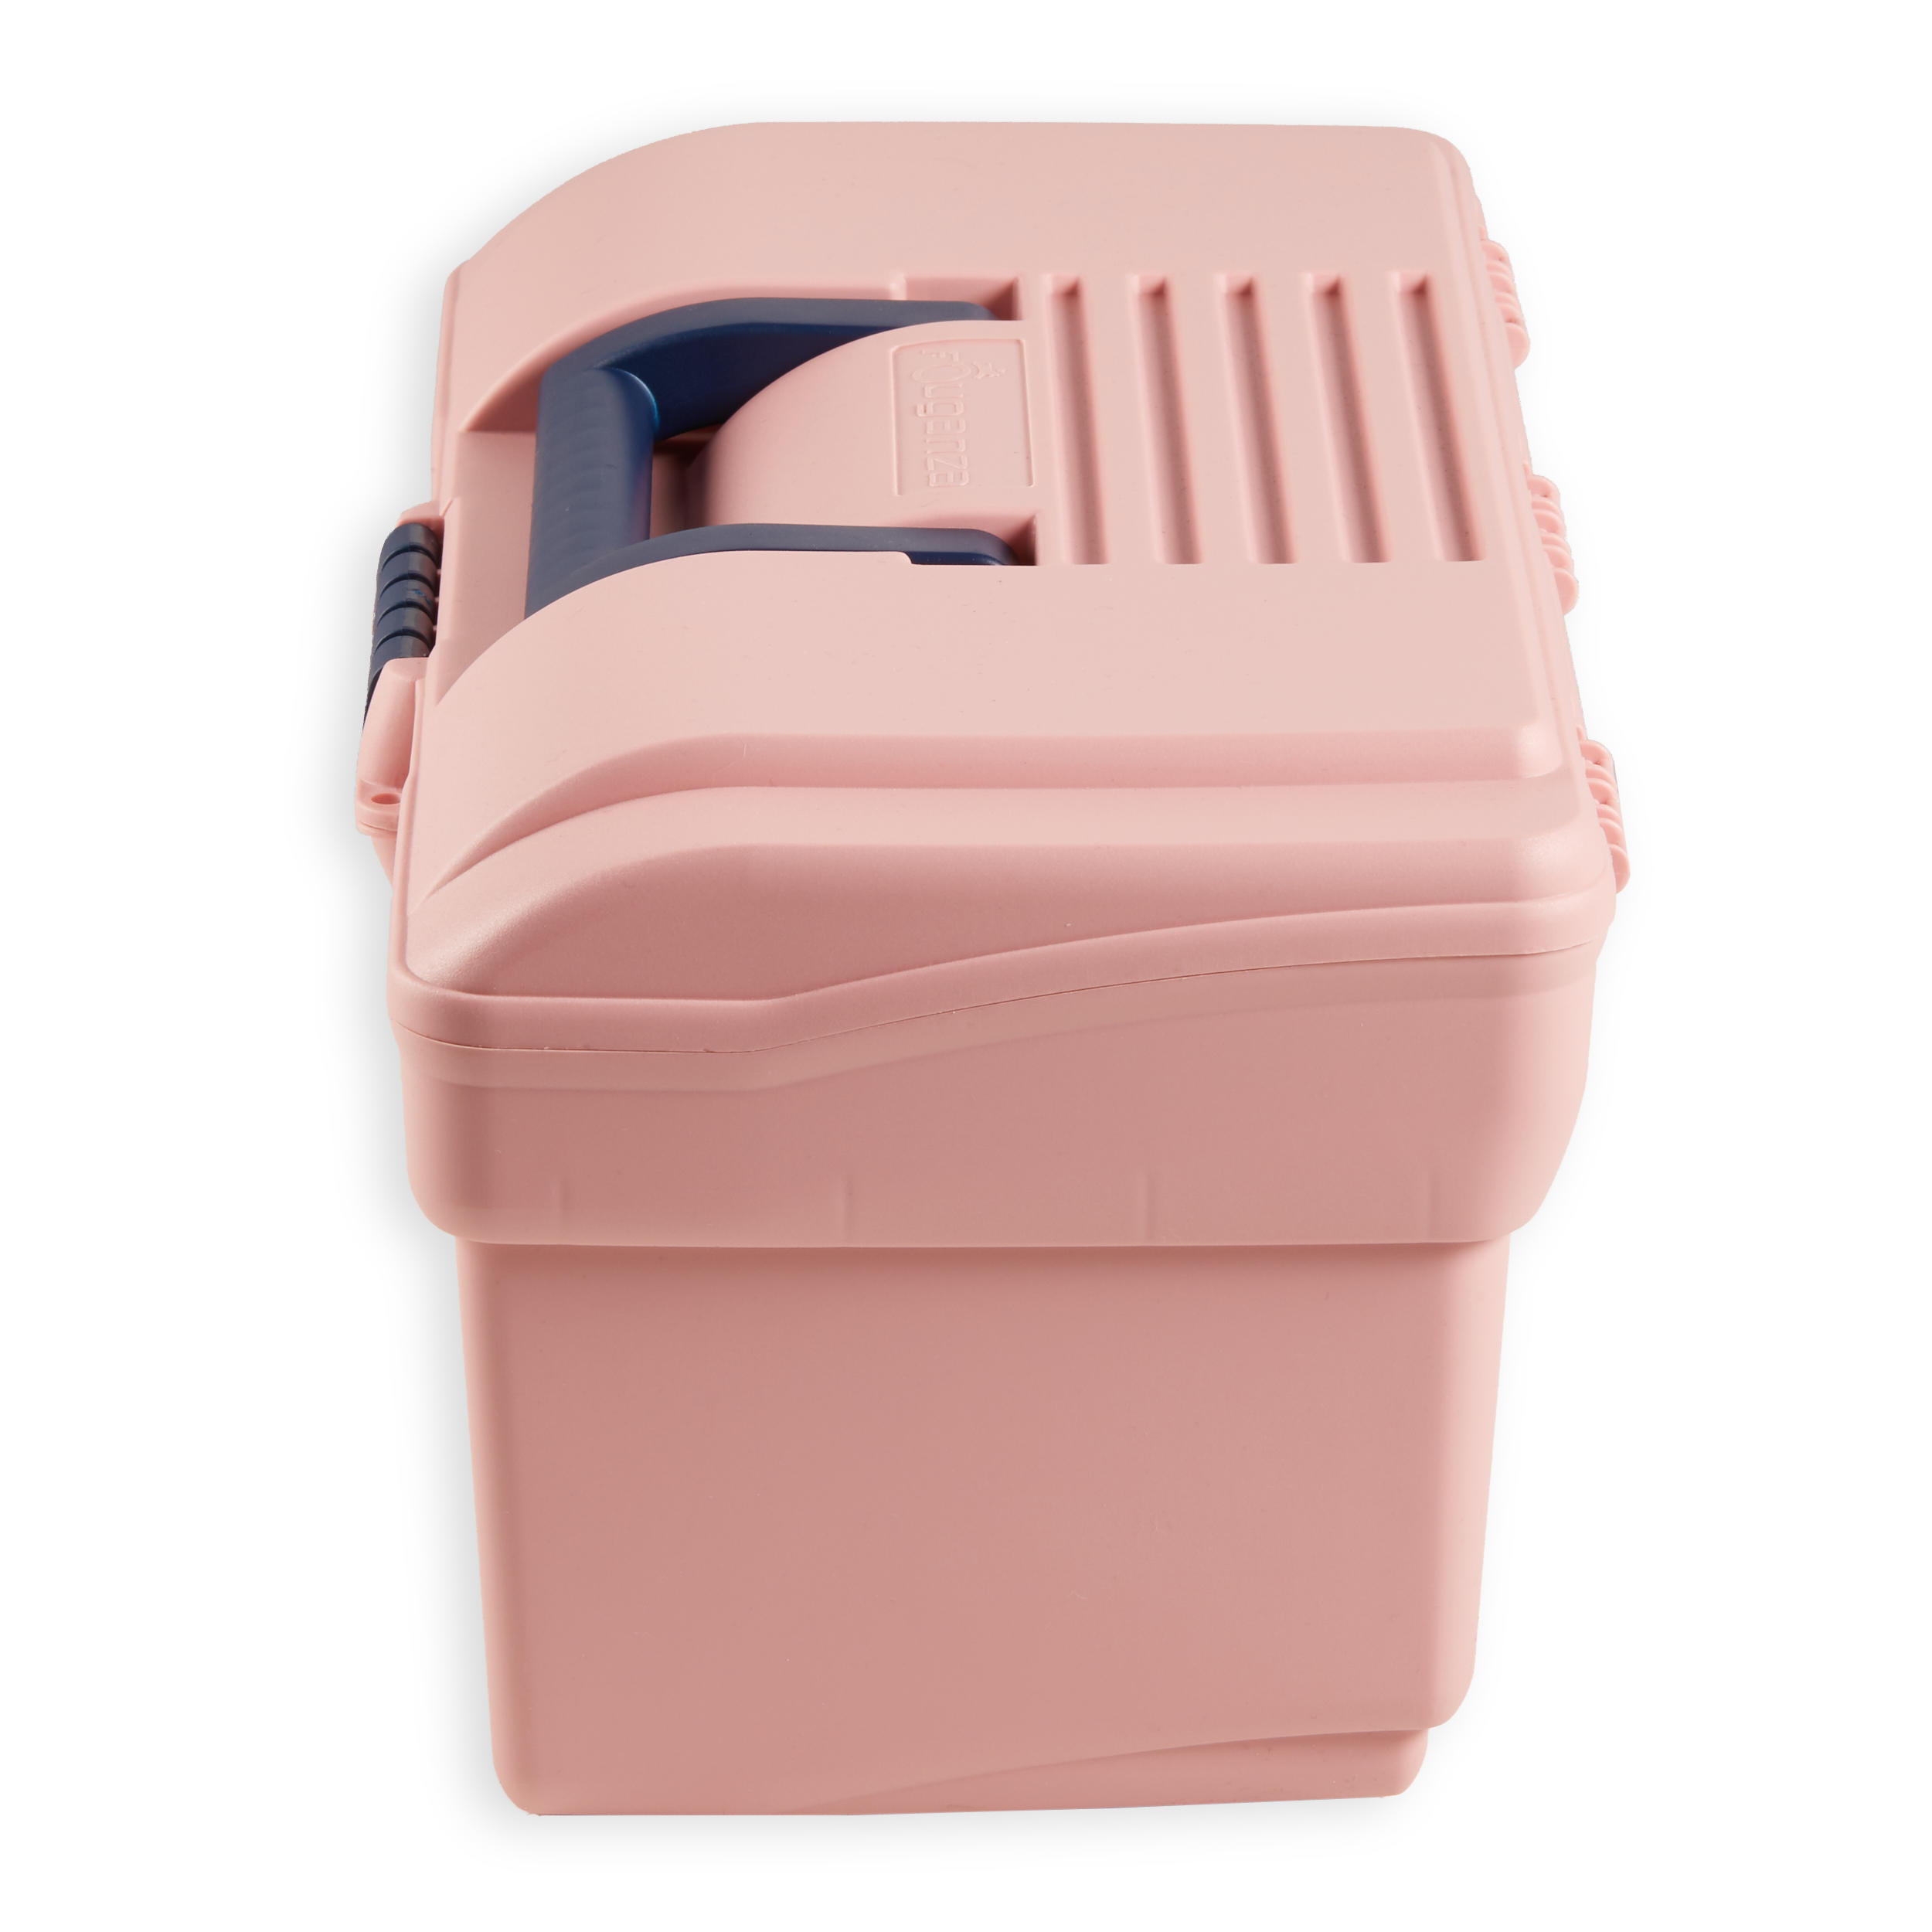 Horse Riding Grooming Case 300 - Pink / Navy 3/5